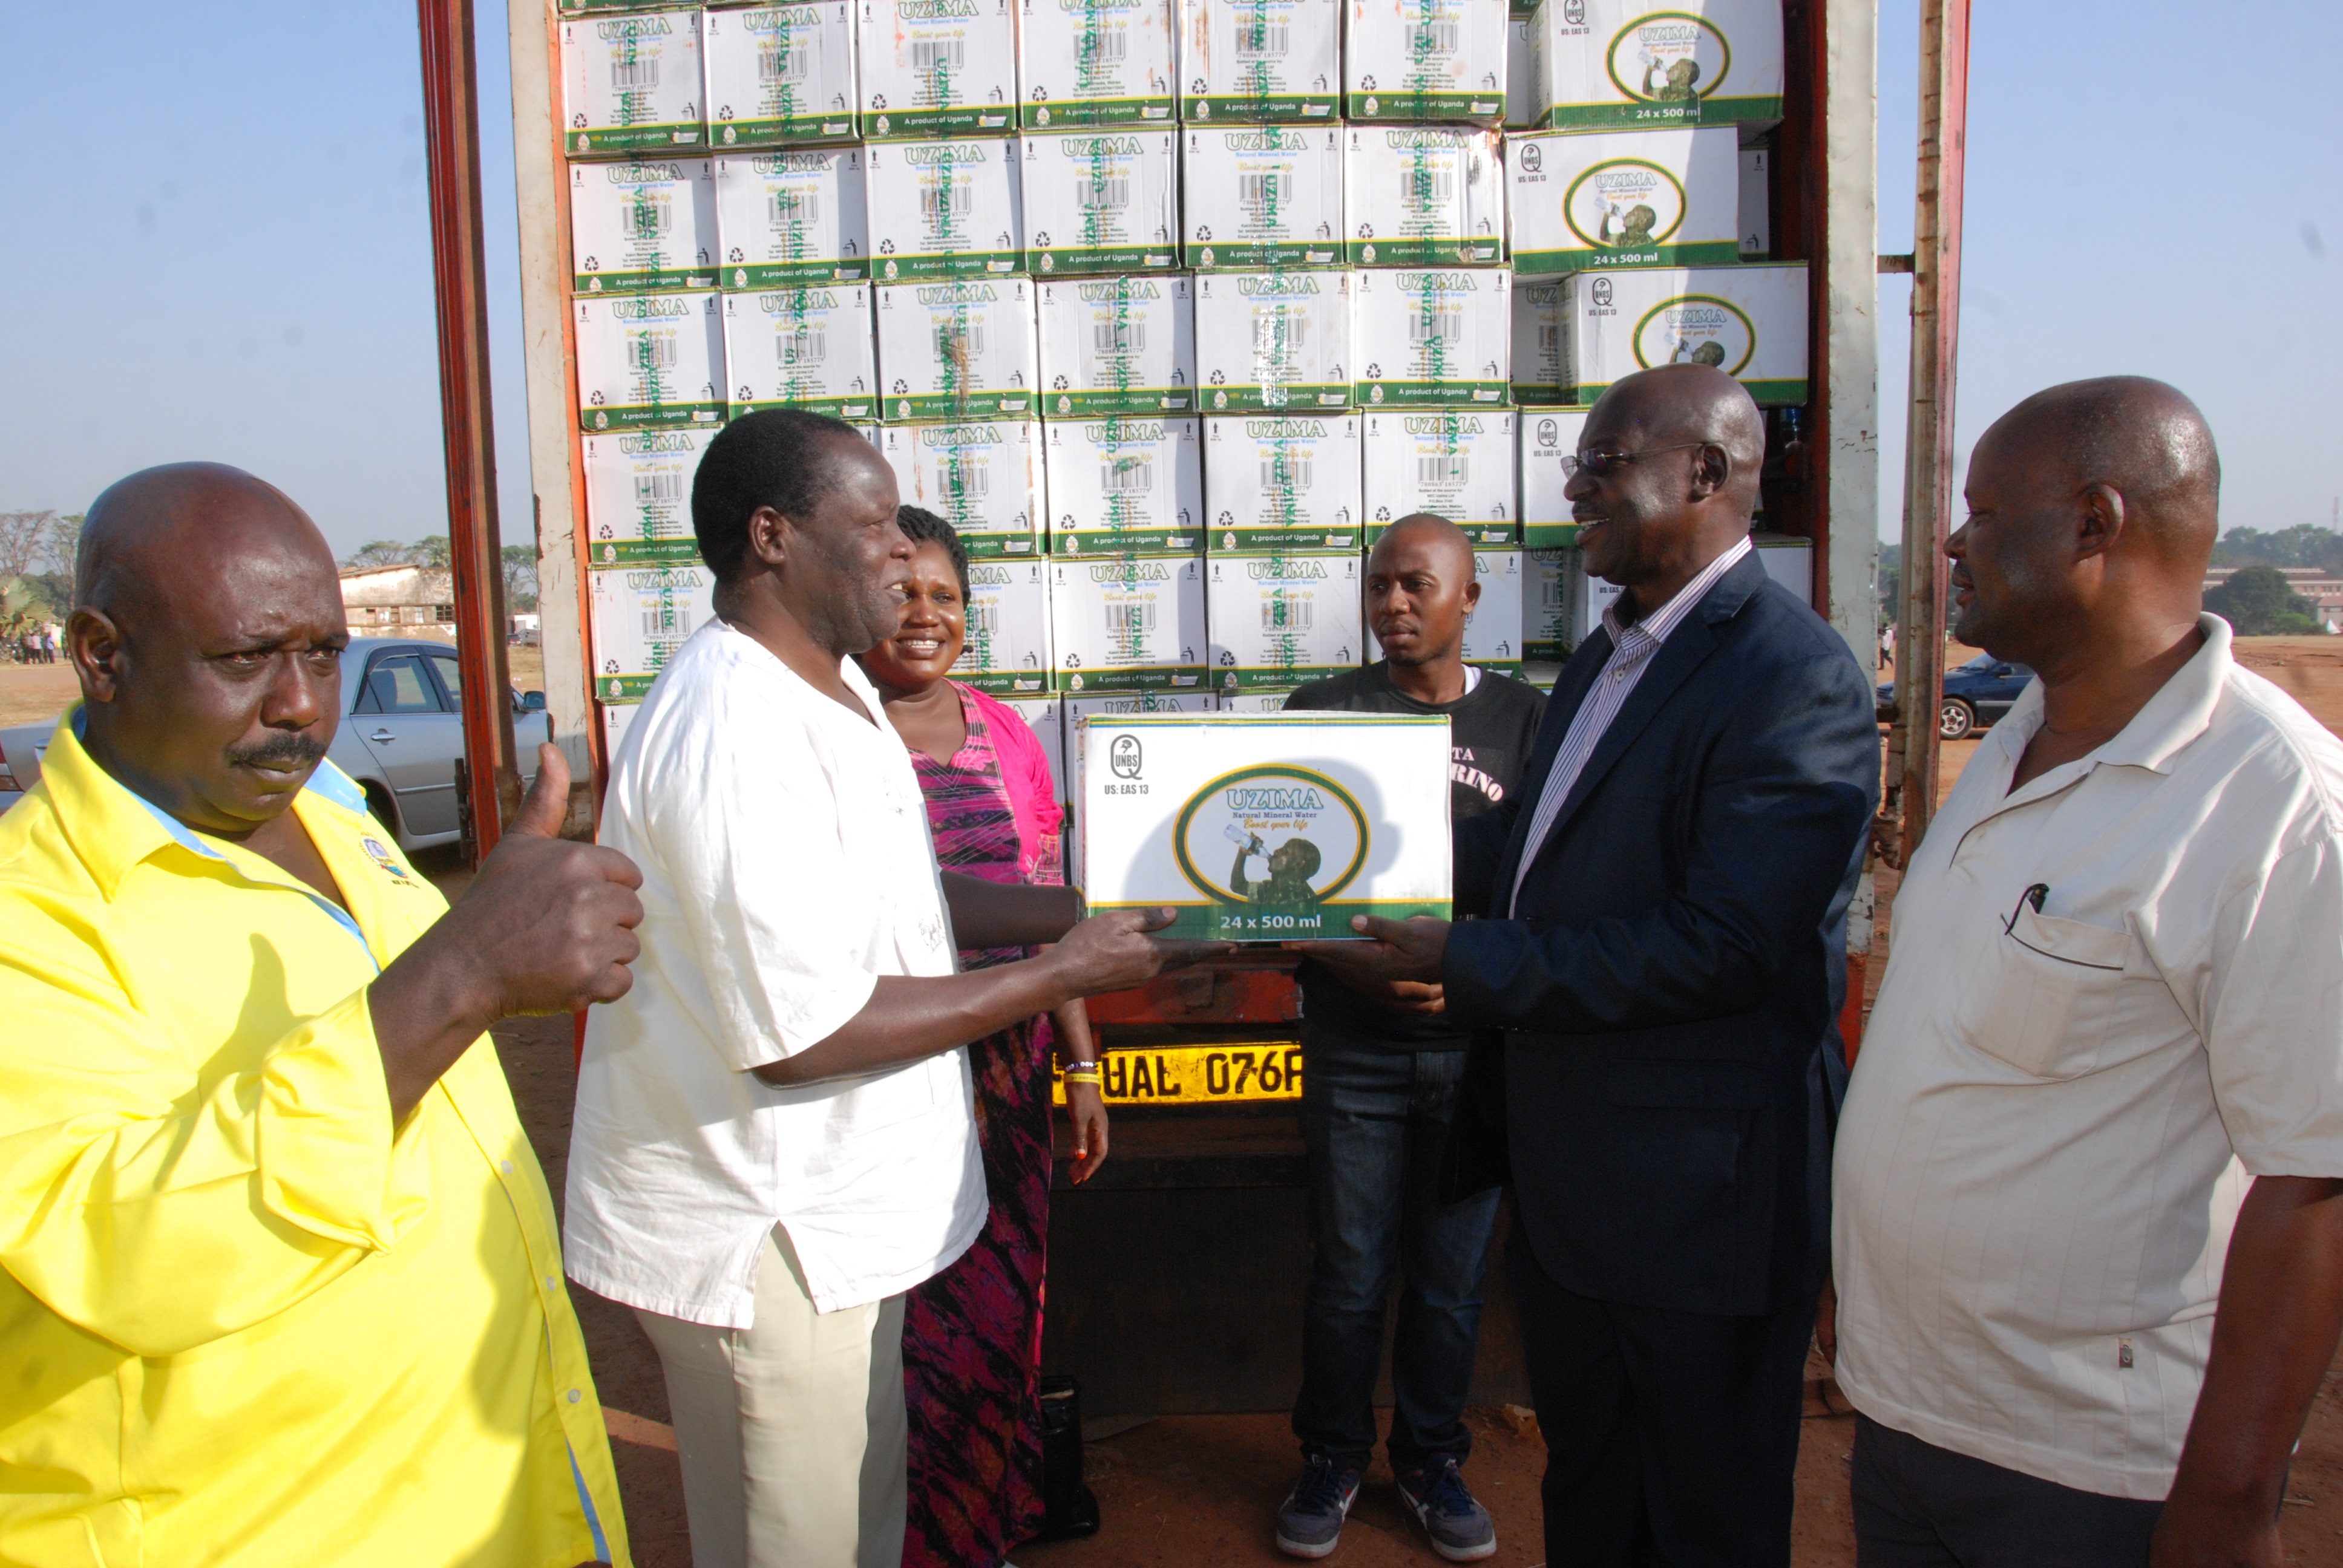 General Oketta handing over a box of water to Capt Santo Okot Lapolo Gulu RDC as townclerk looks on at the far right